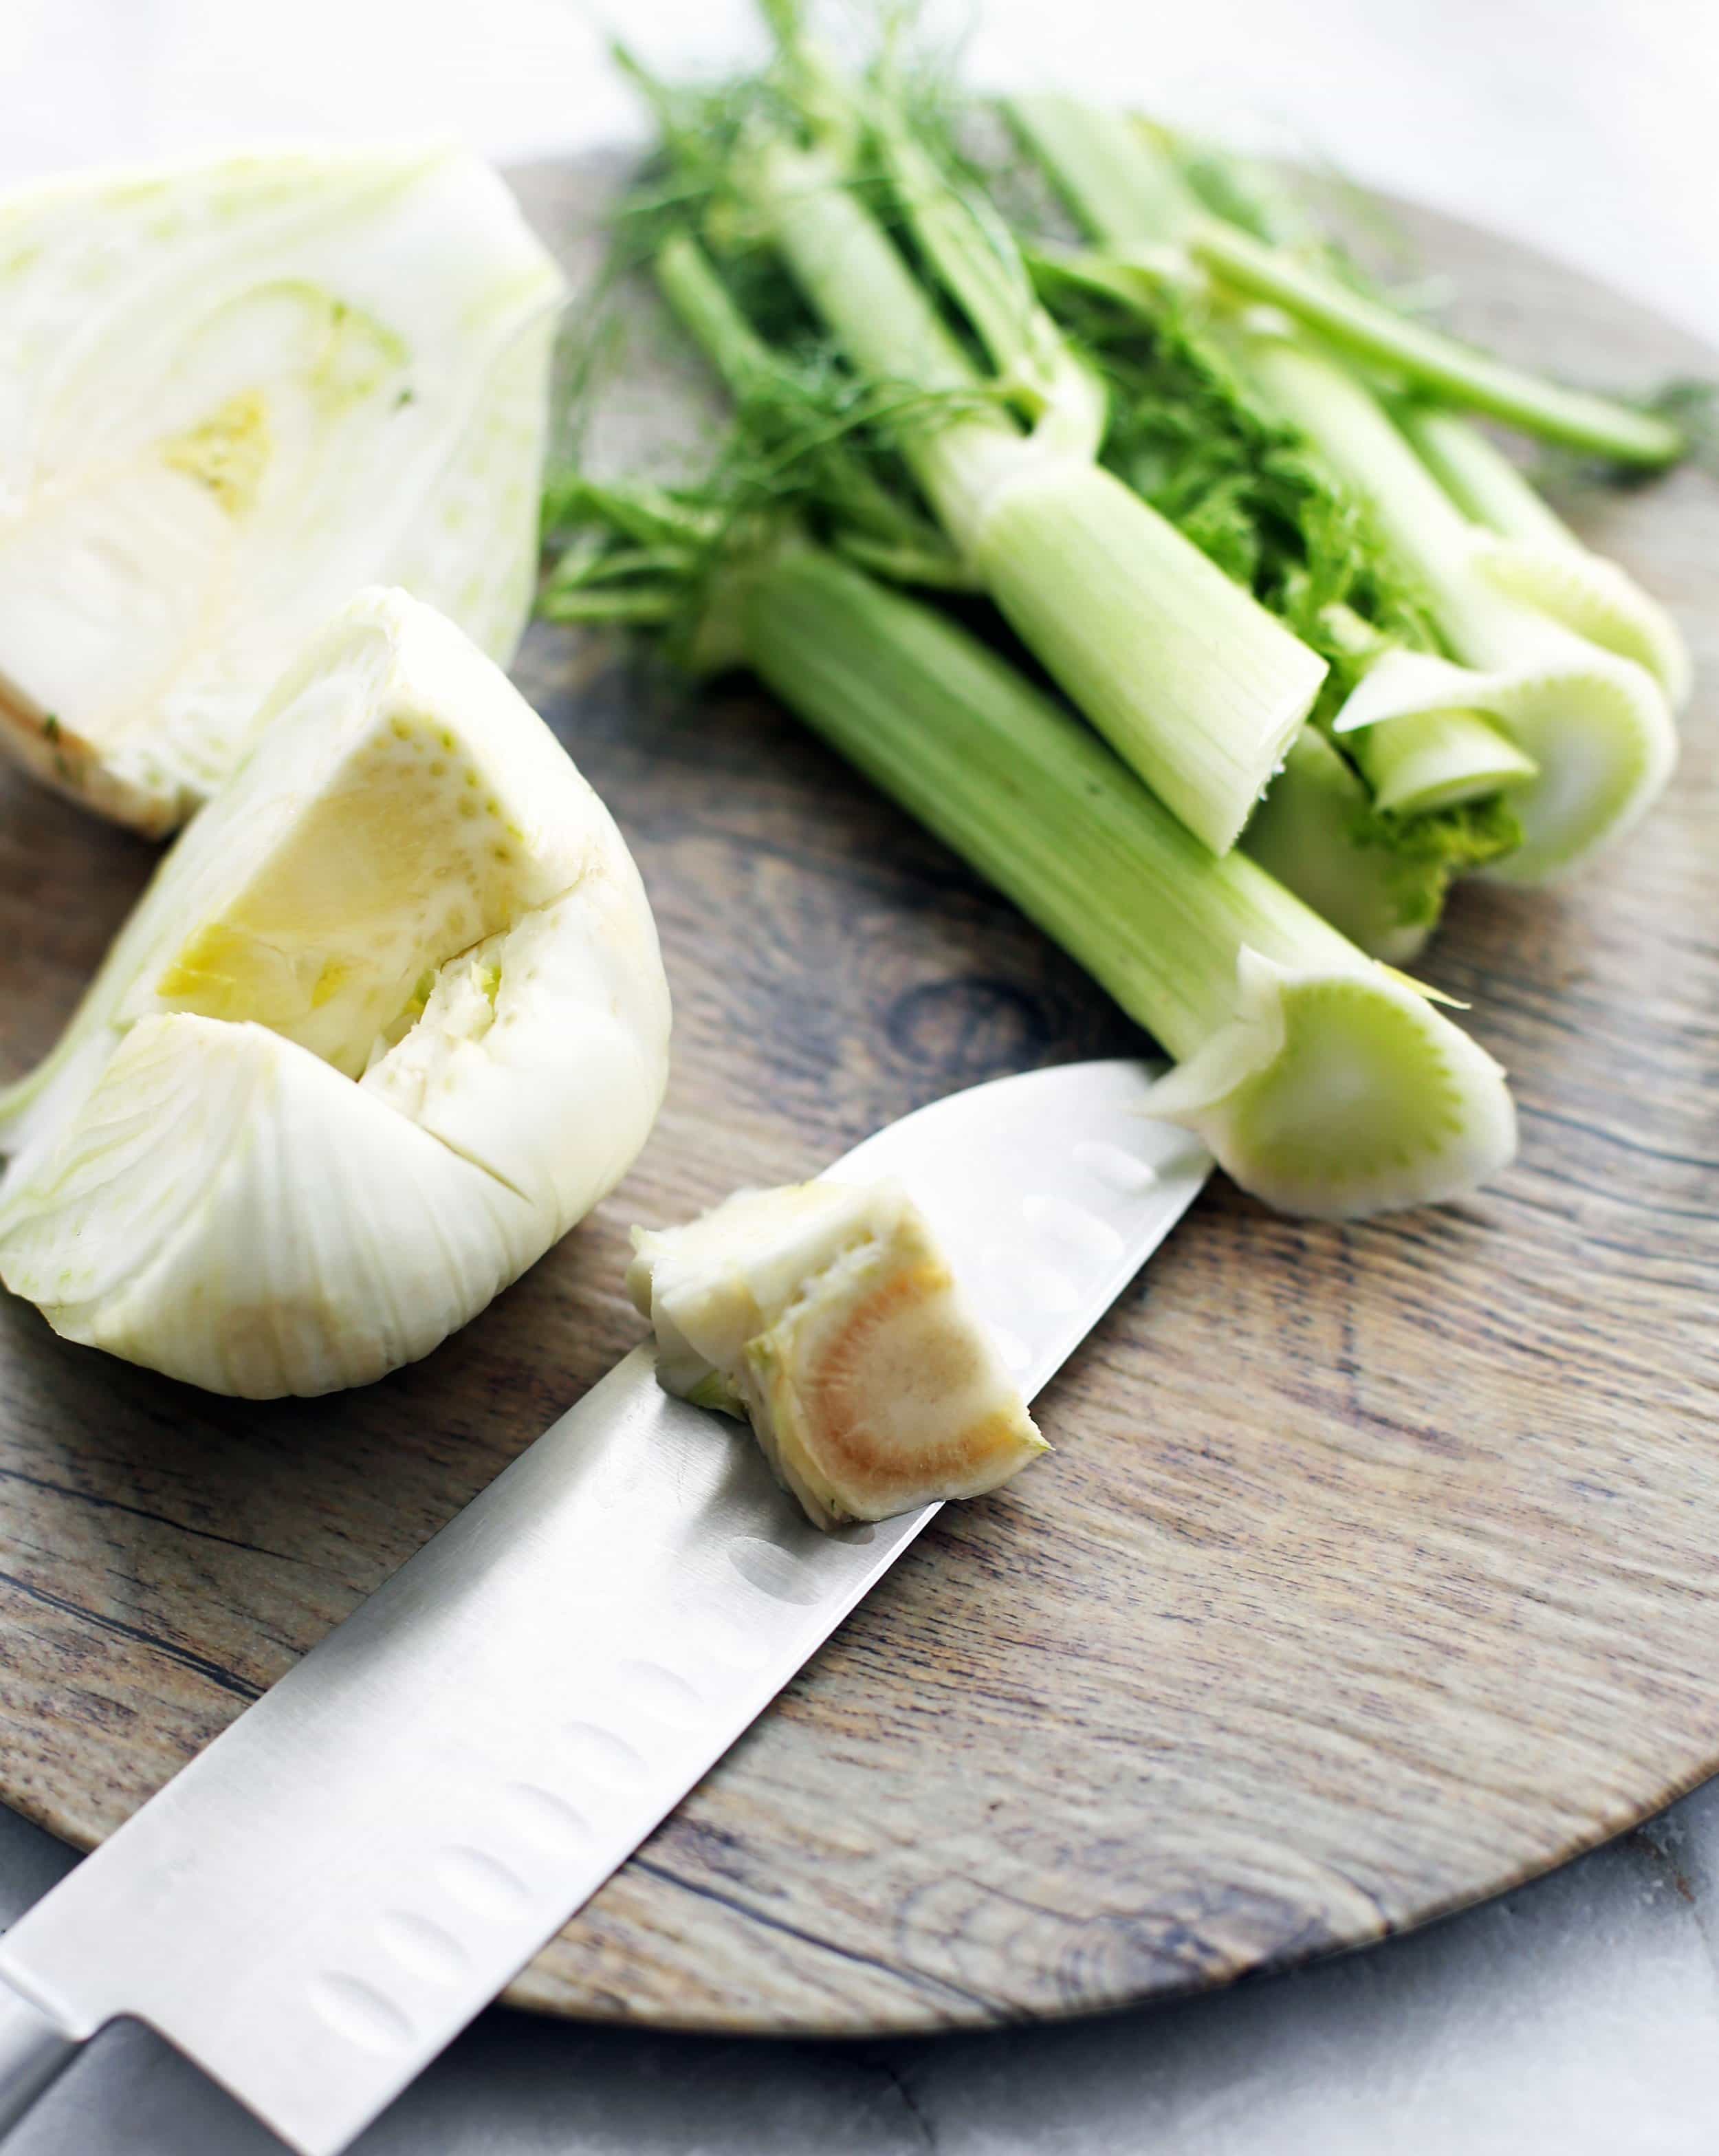 Fennel bulb with tough core cut out of it, that's placed on a sharp knife, all on a wooden platter.